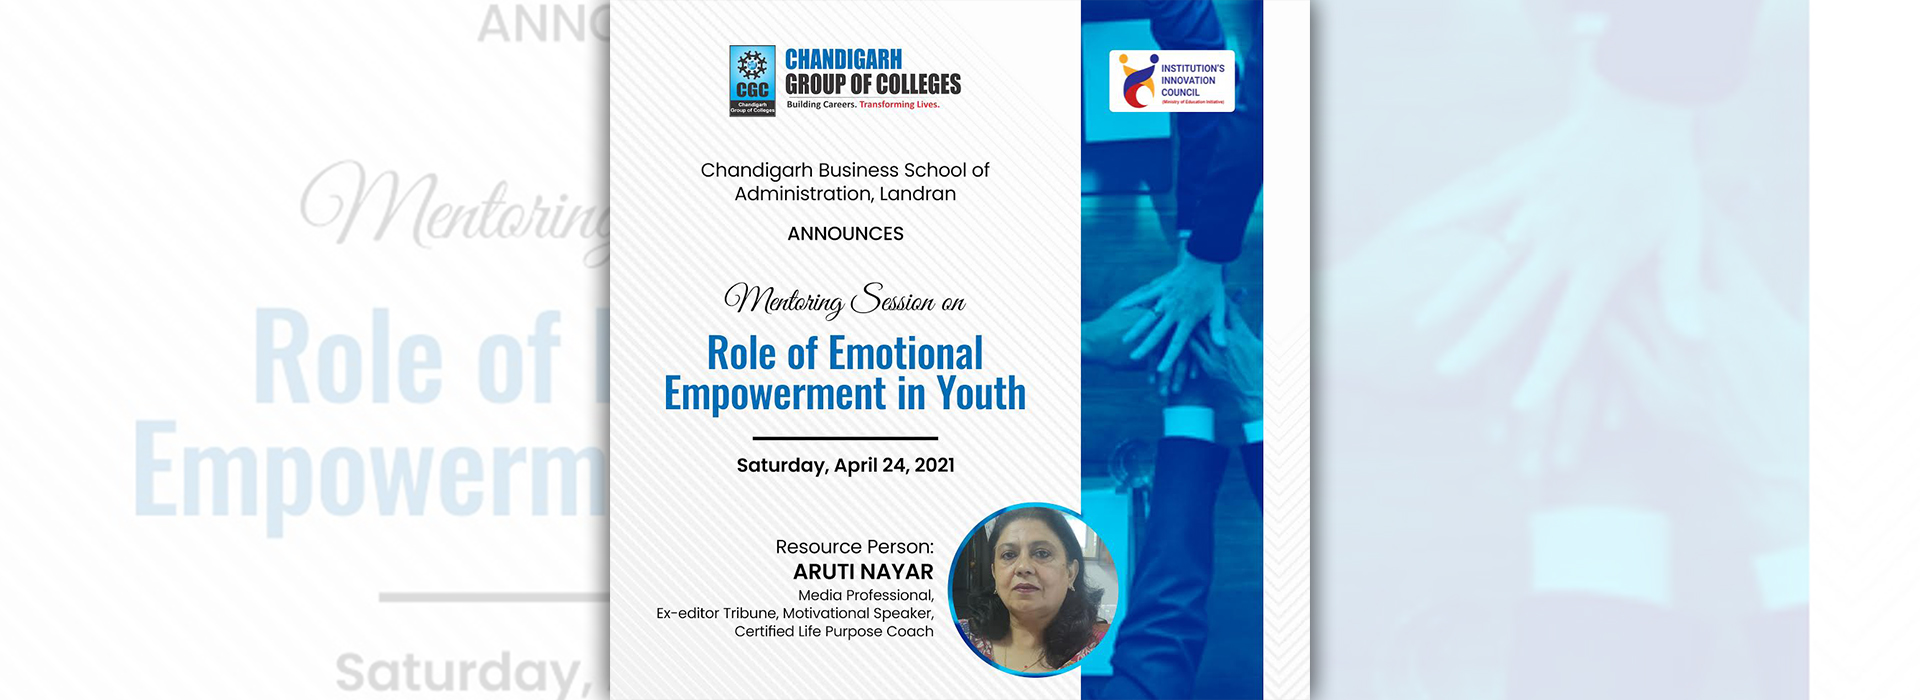 Mentoring session on “Role of Emotional Empowerment in Youth” 